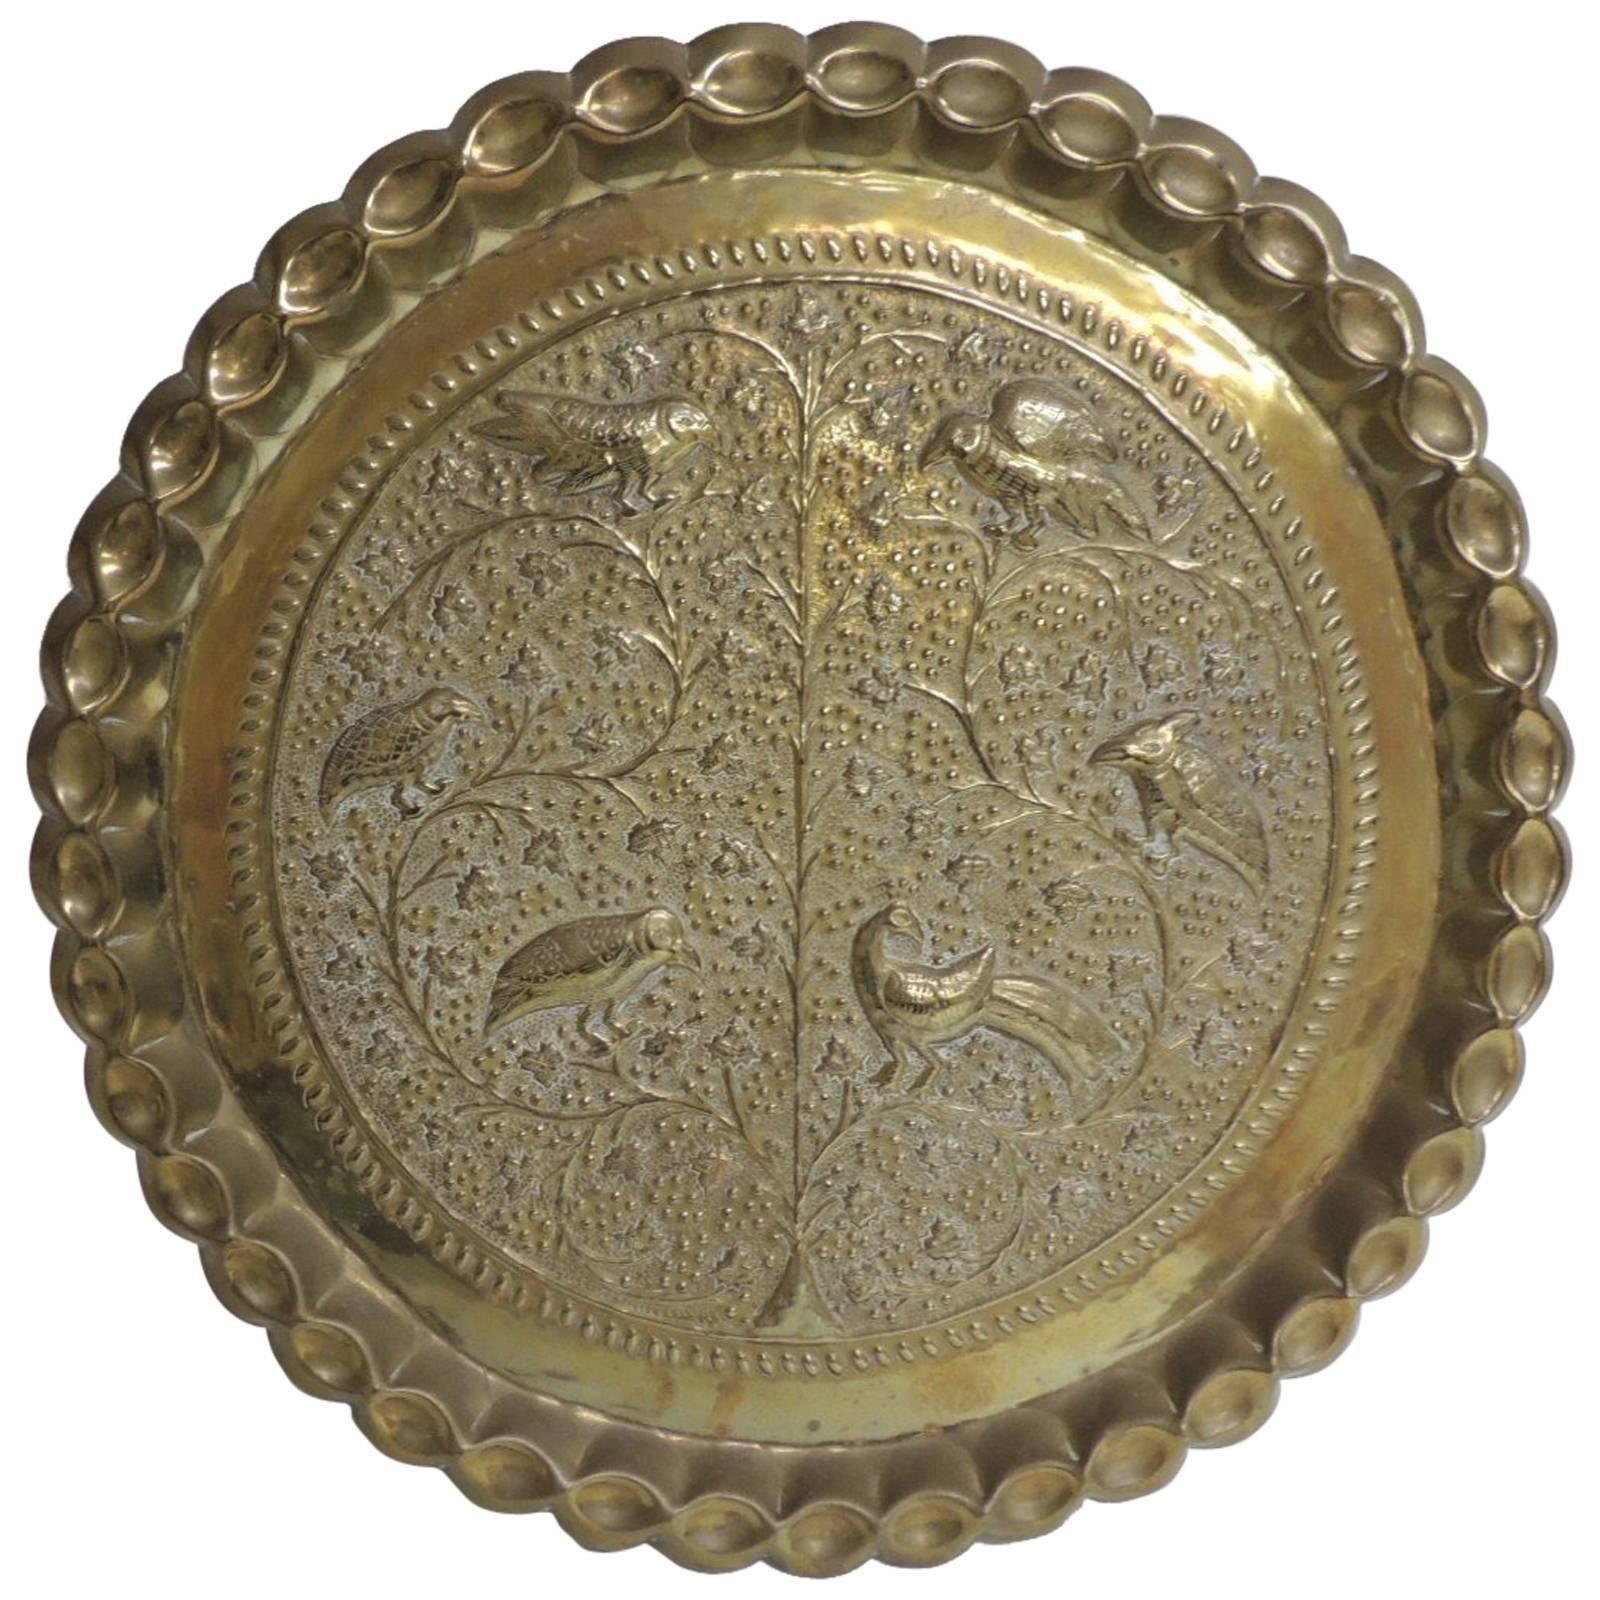 Vintage Persian Round Serving Tray